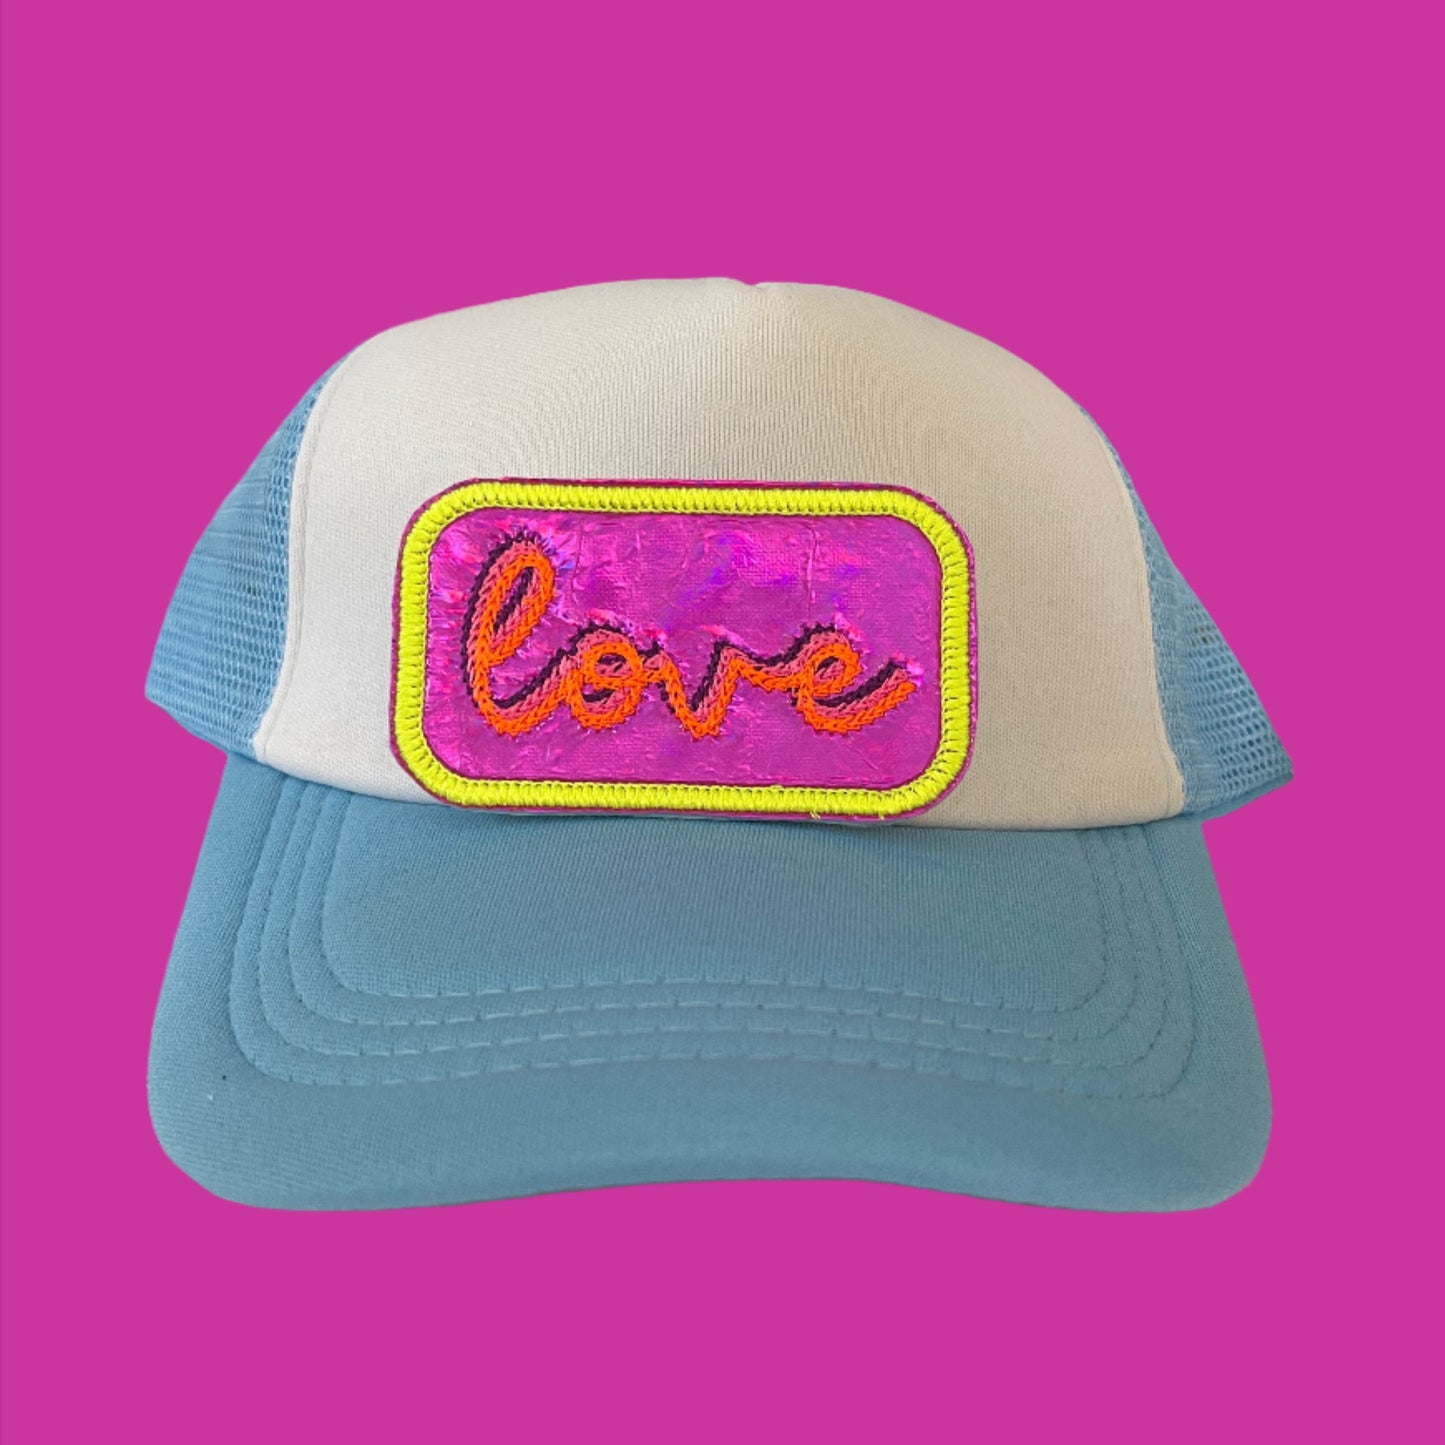 Neon iron-on patch featuring the word "love" in vibrant colors, set against a shiny, eye-catching background, showcasing a bold and retro aesthetic.